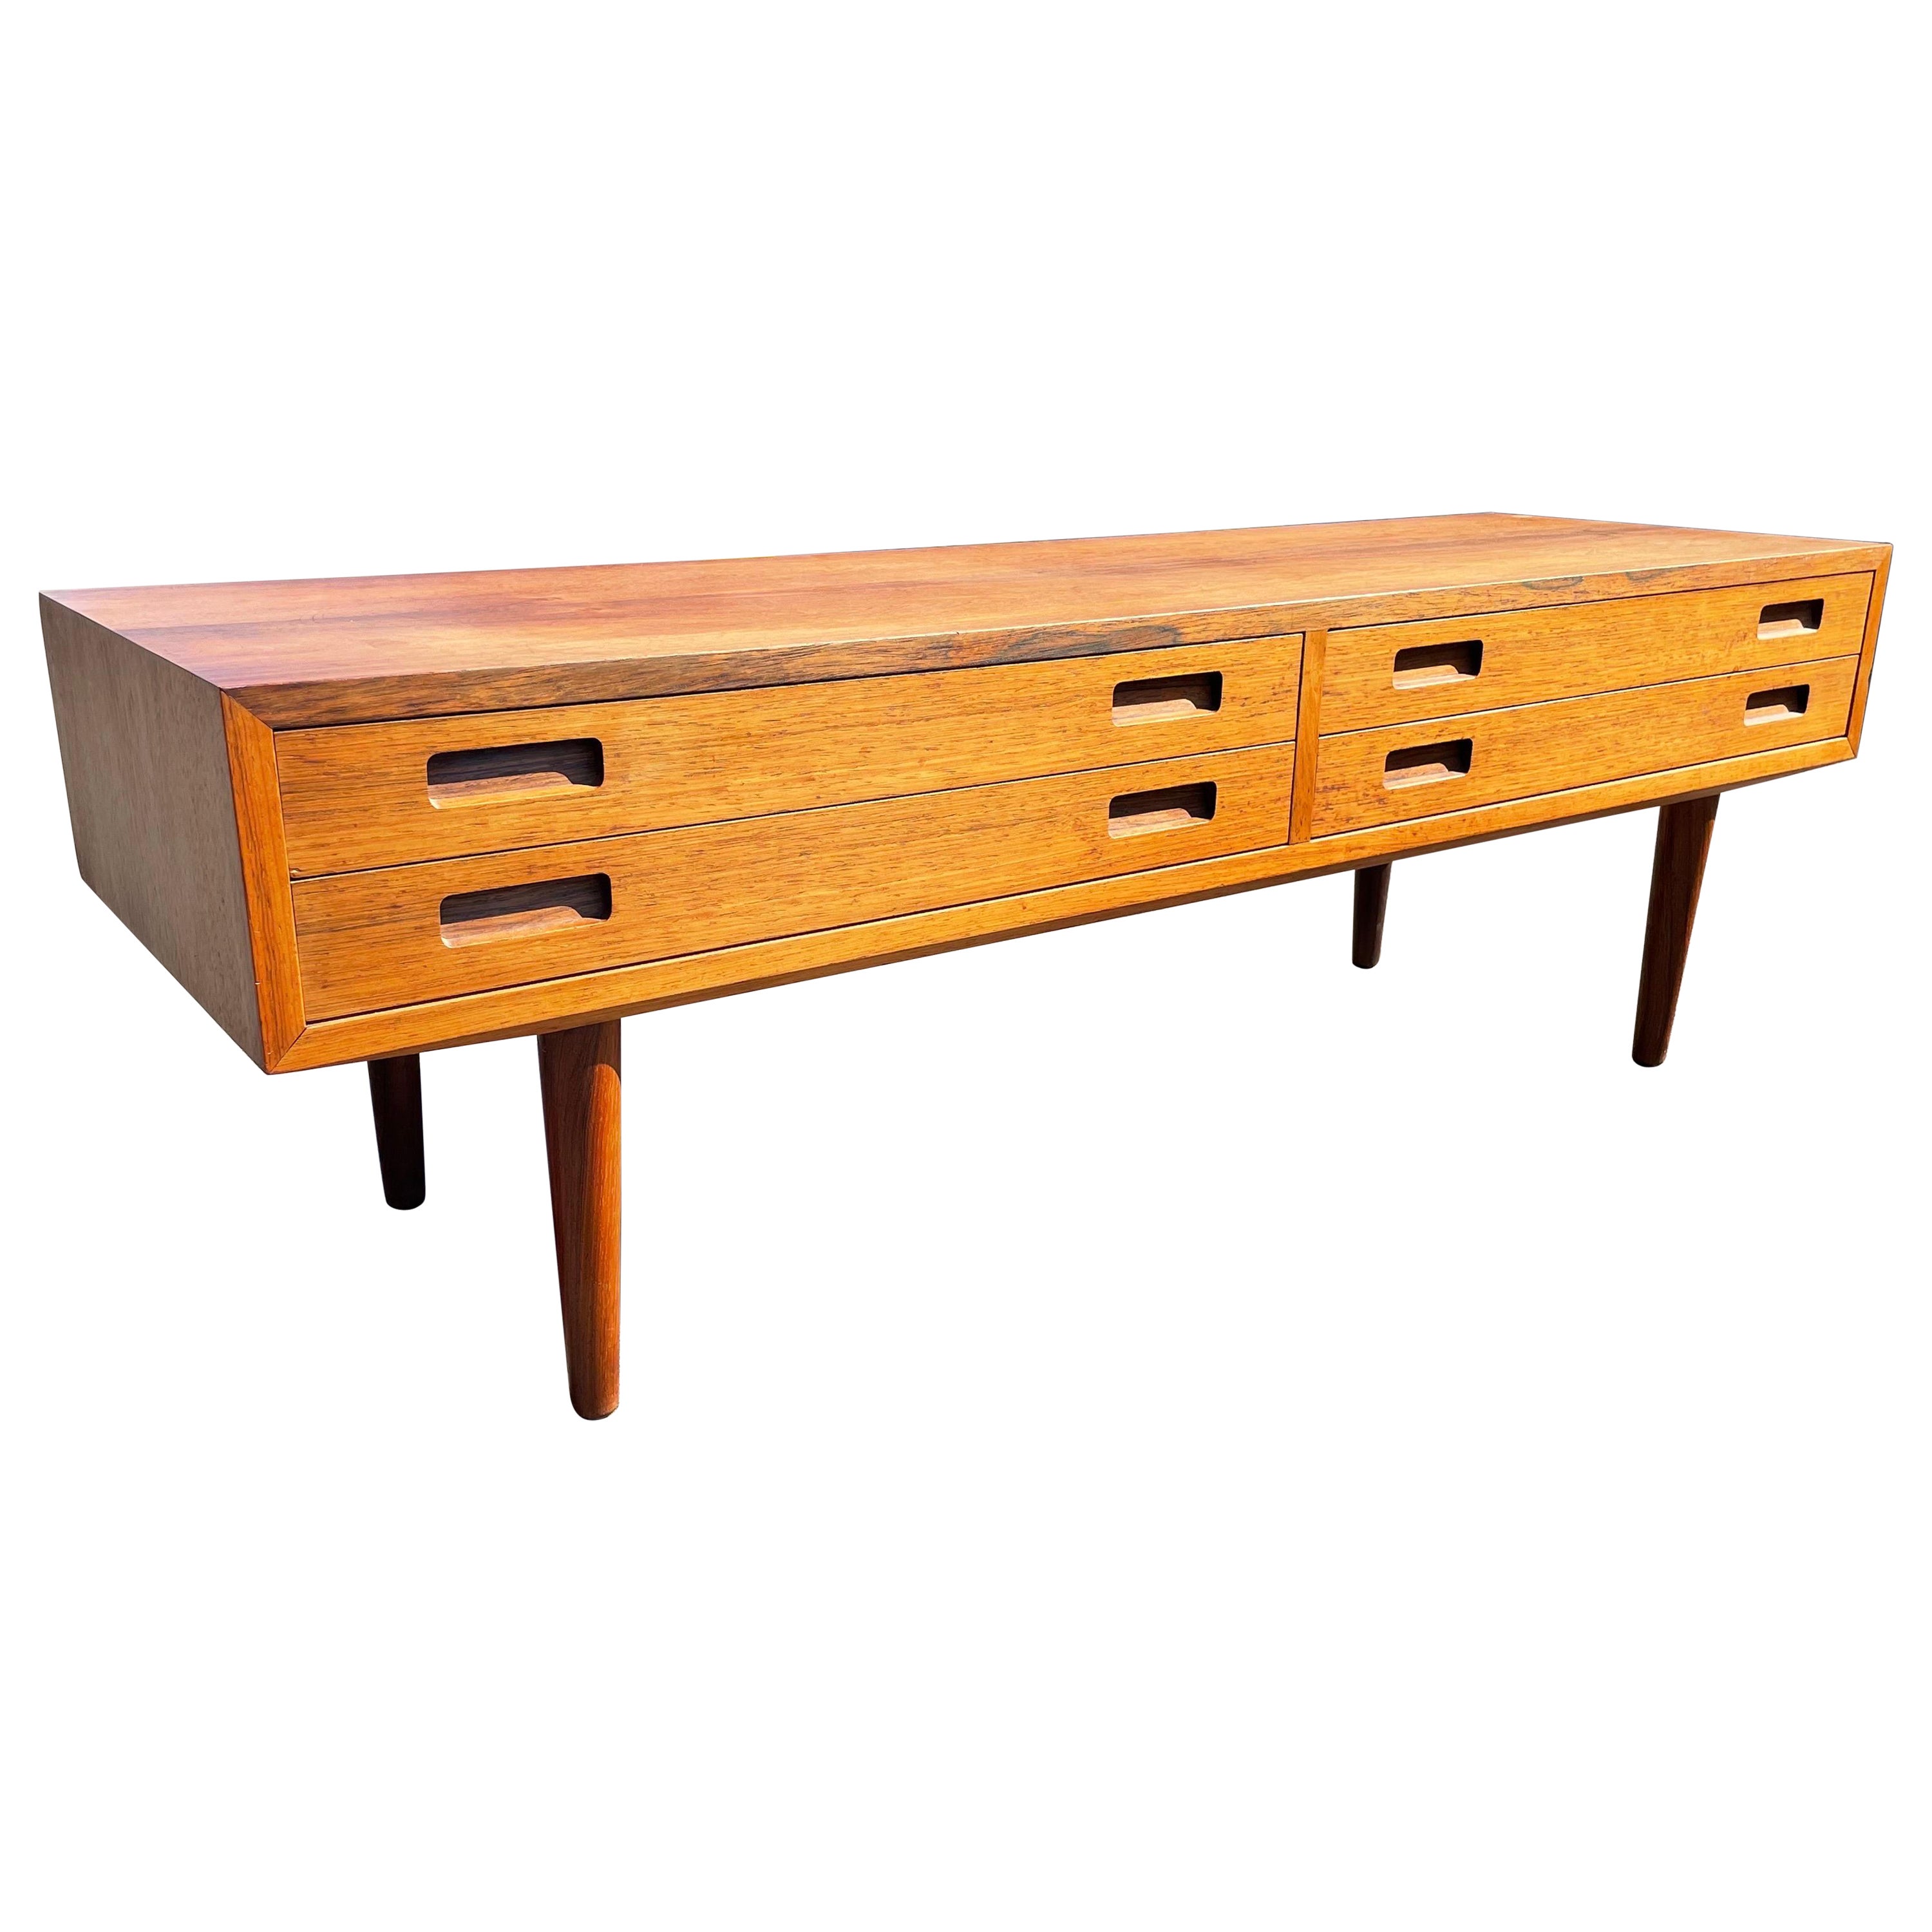 Unique Mid-Century Modern Danish Sideboard from the 1960's